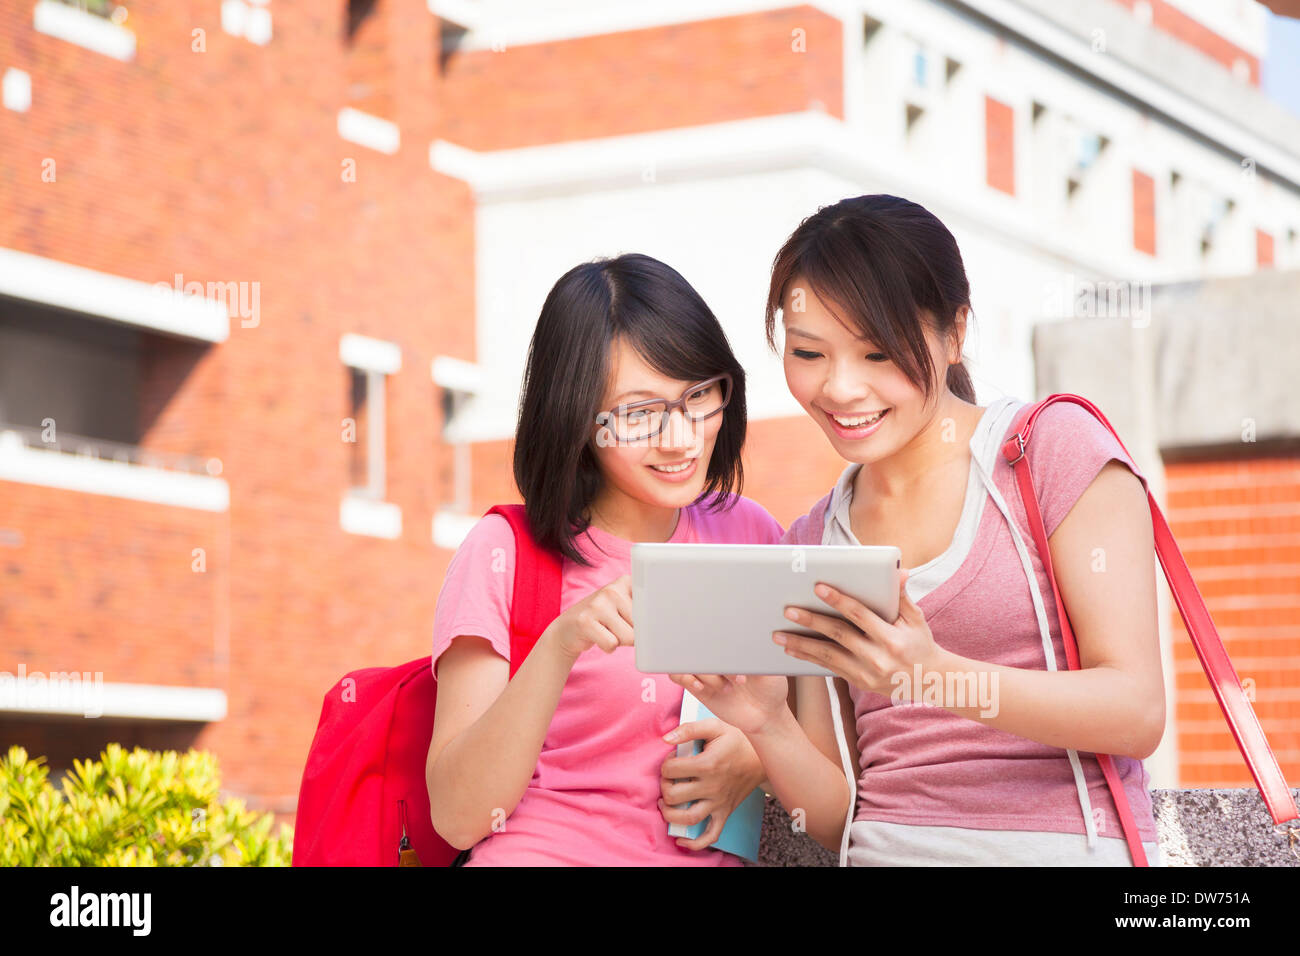 two students using a tablet to discuss homework at campus Stock Photo